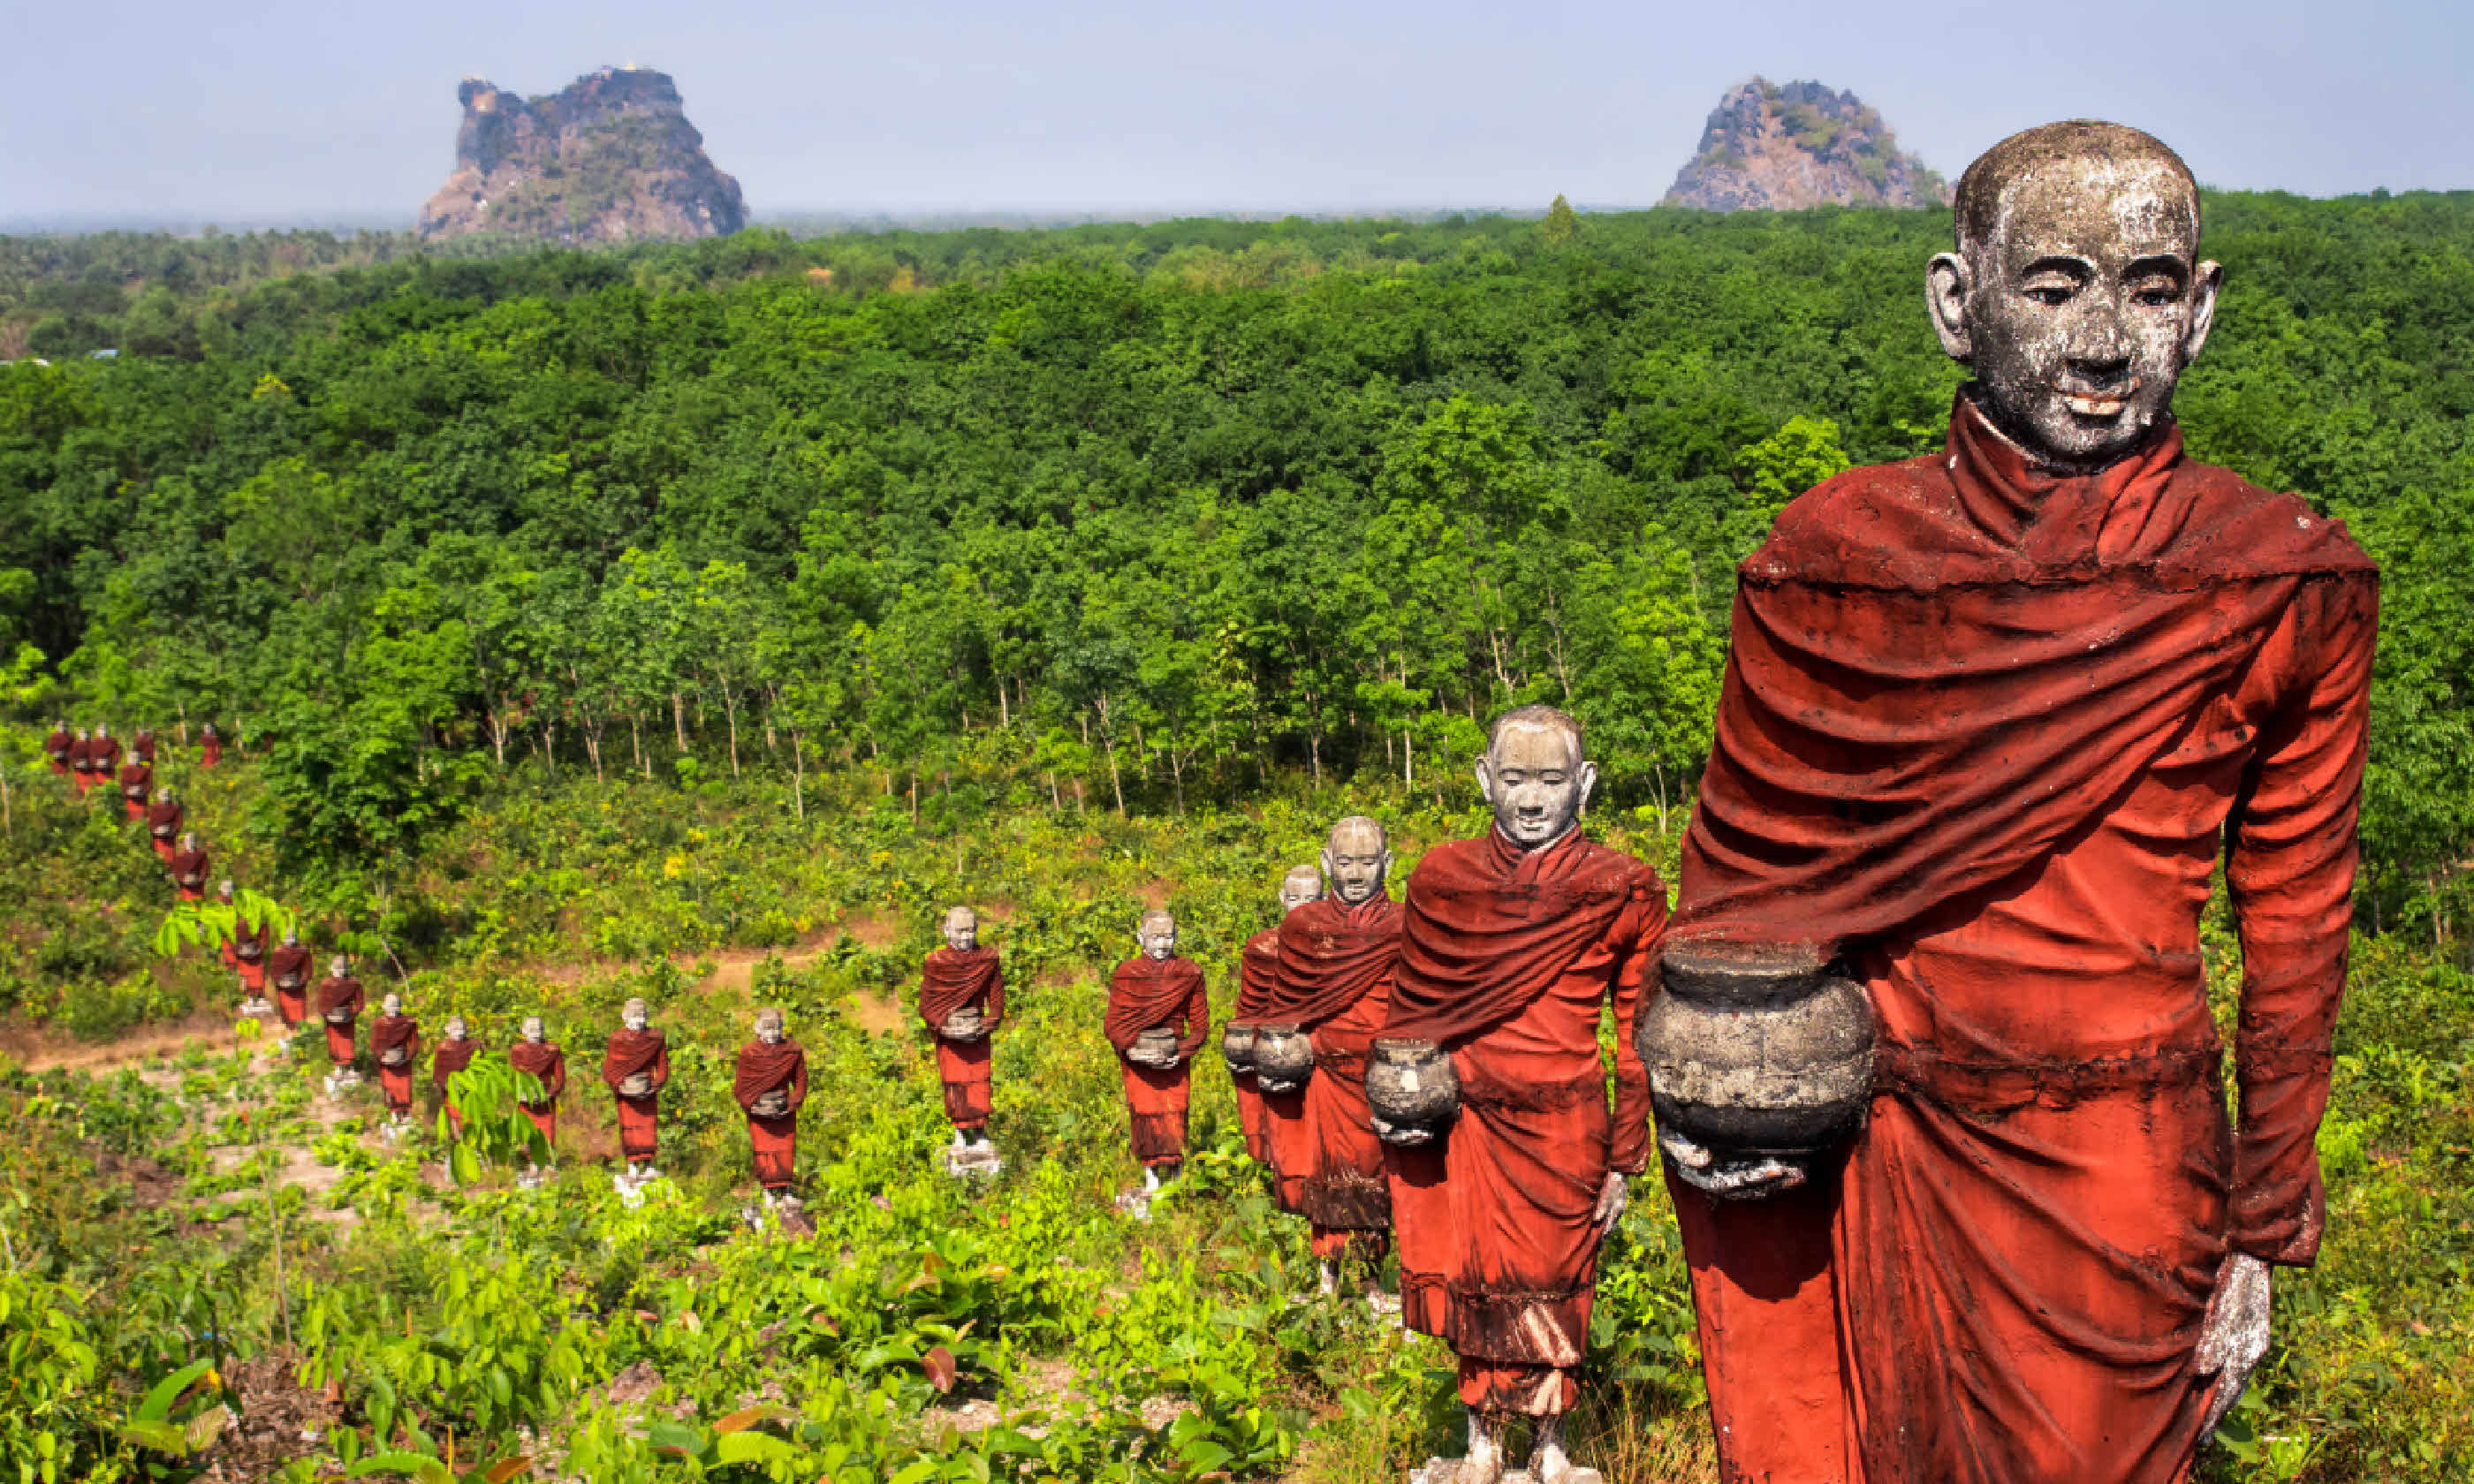 Statues of Buddhist monks collecting alms (Shutterstock: see credit below)